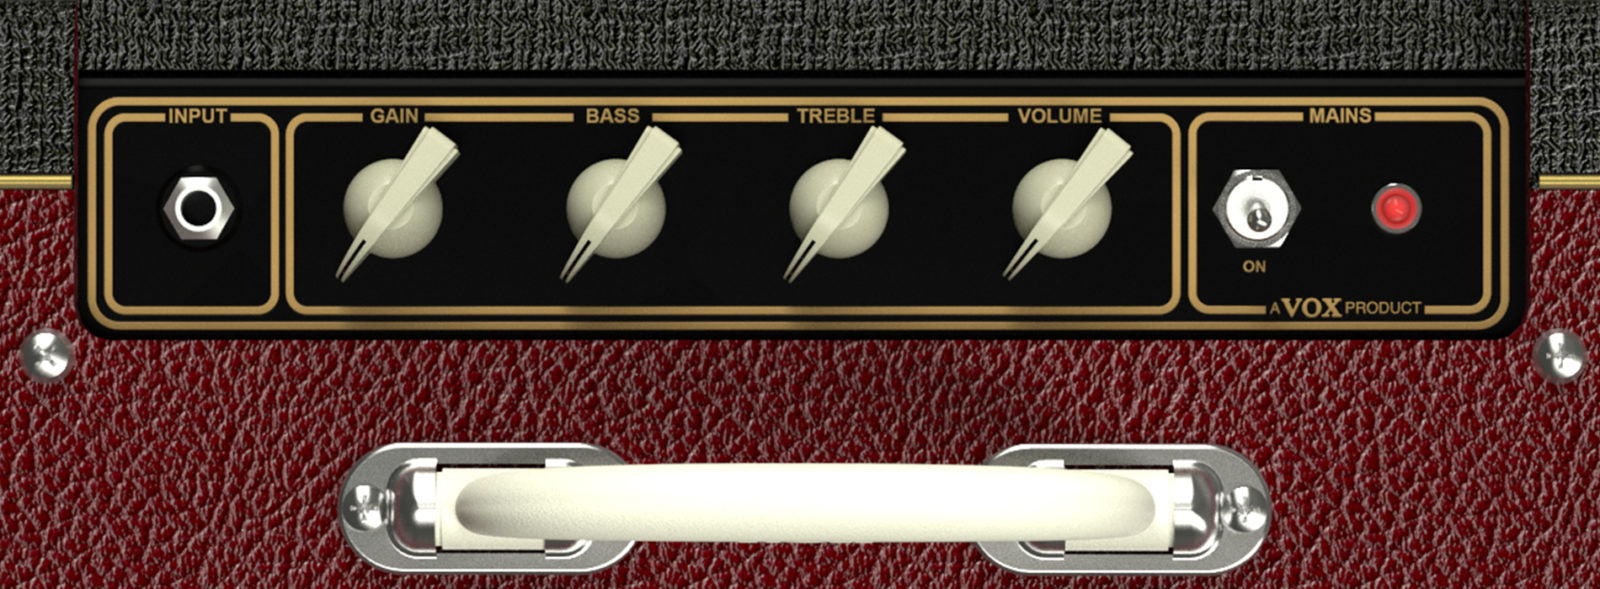 VOX AC4C1-TTBM All Tube Limited Edition Combo (Black and Maroon two-tone color)